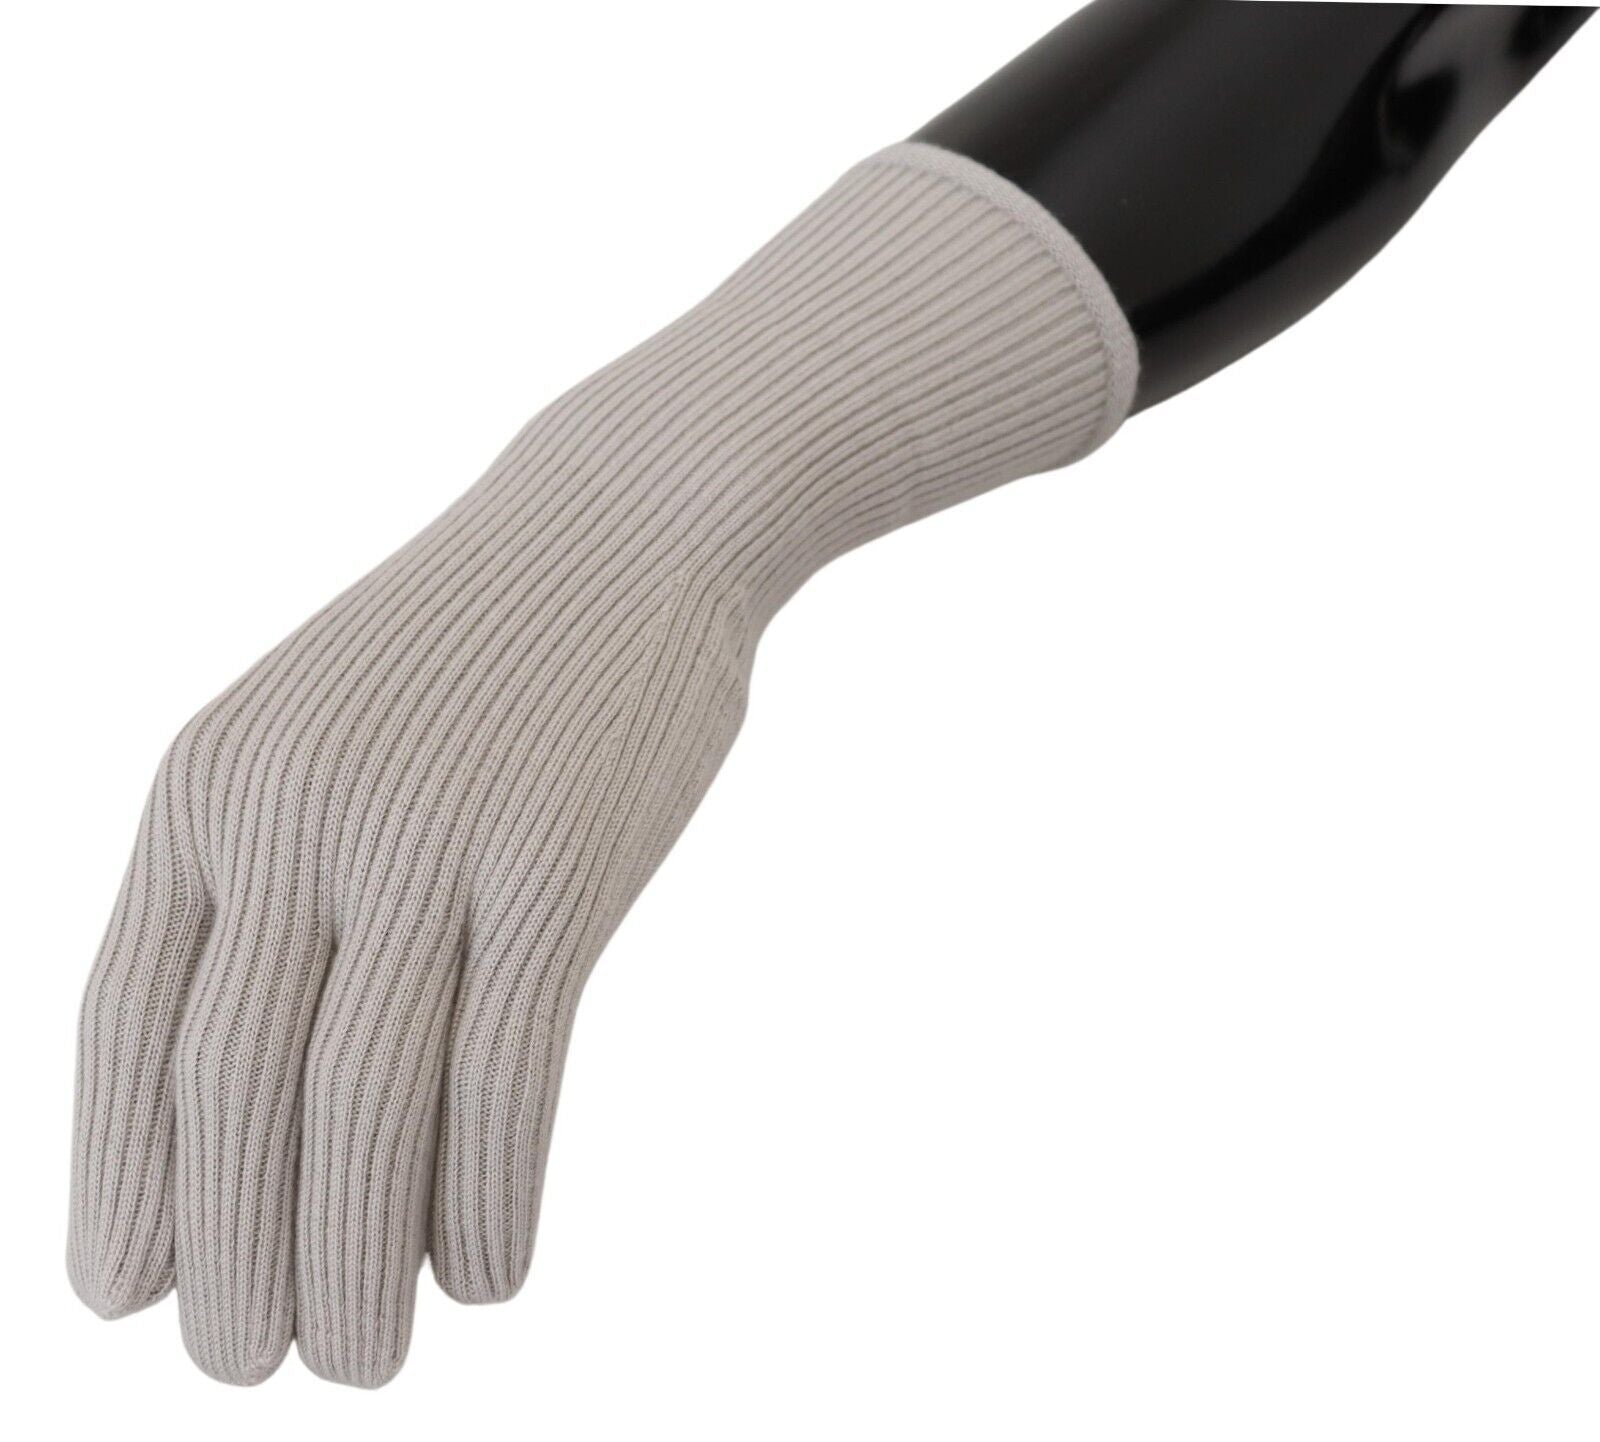 Dolce & Gabbana Light Gray Cashmere Hands Mitten Mens Gloves - Designed by Dolce & Gabbana Available to Buy at a Discounted Price on Moon Behind The Hill Online Designer Discount Store